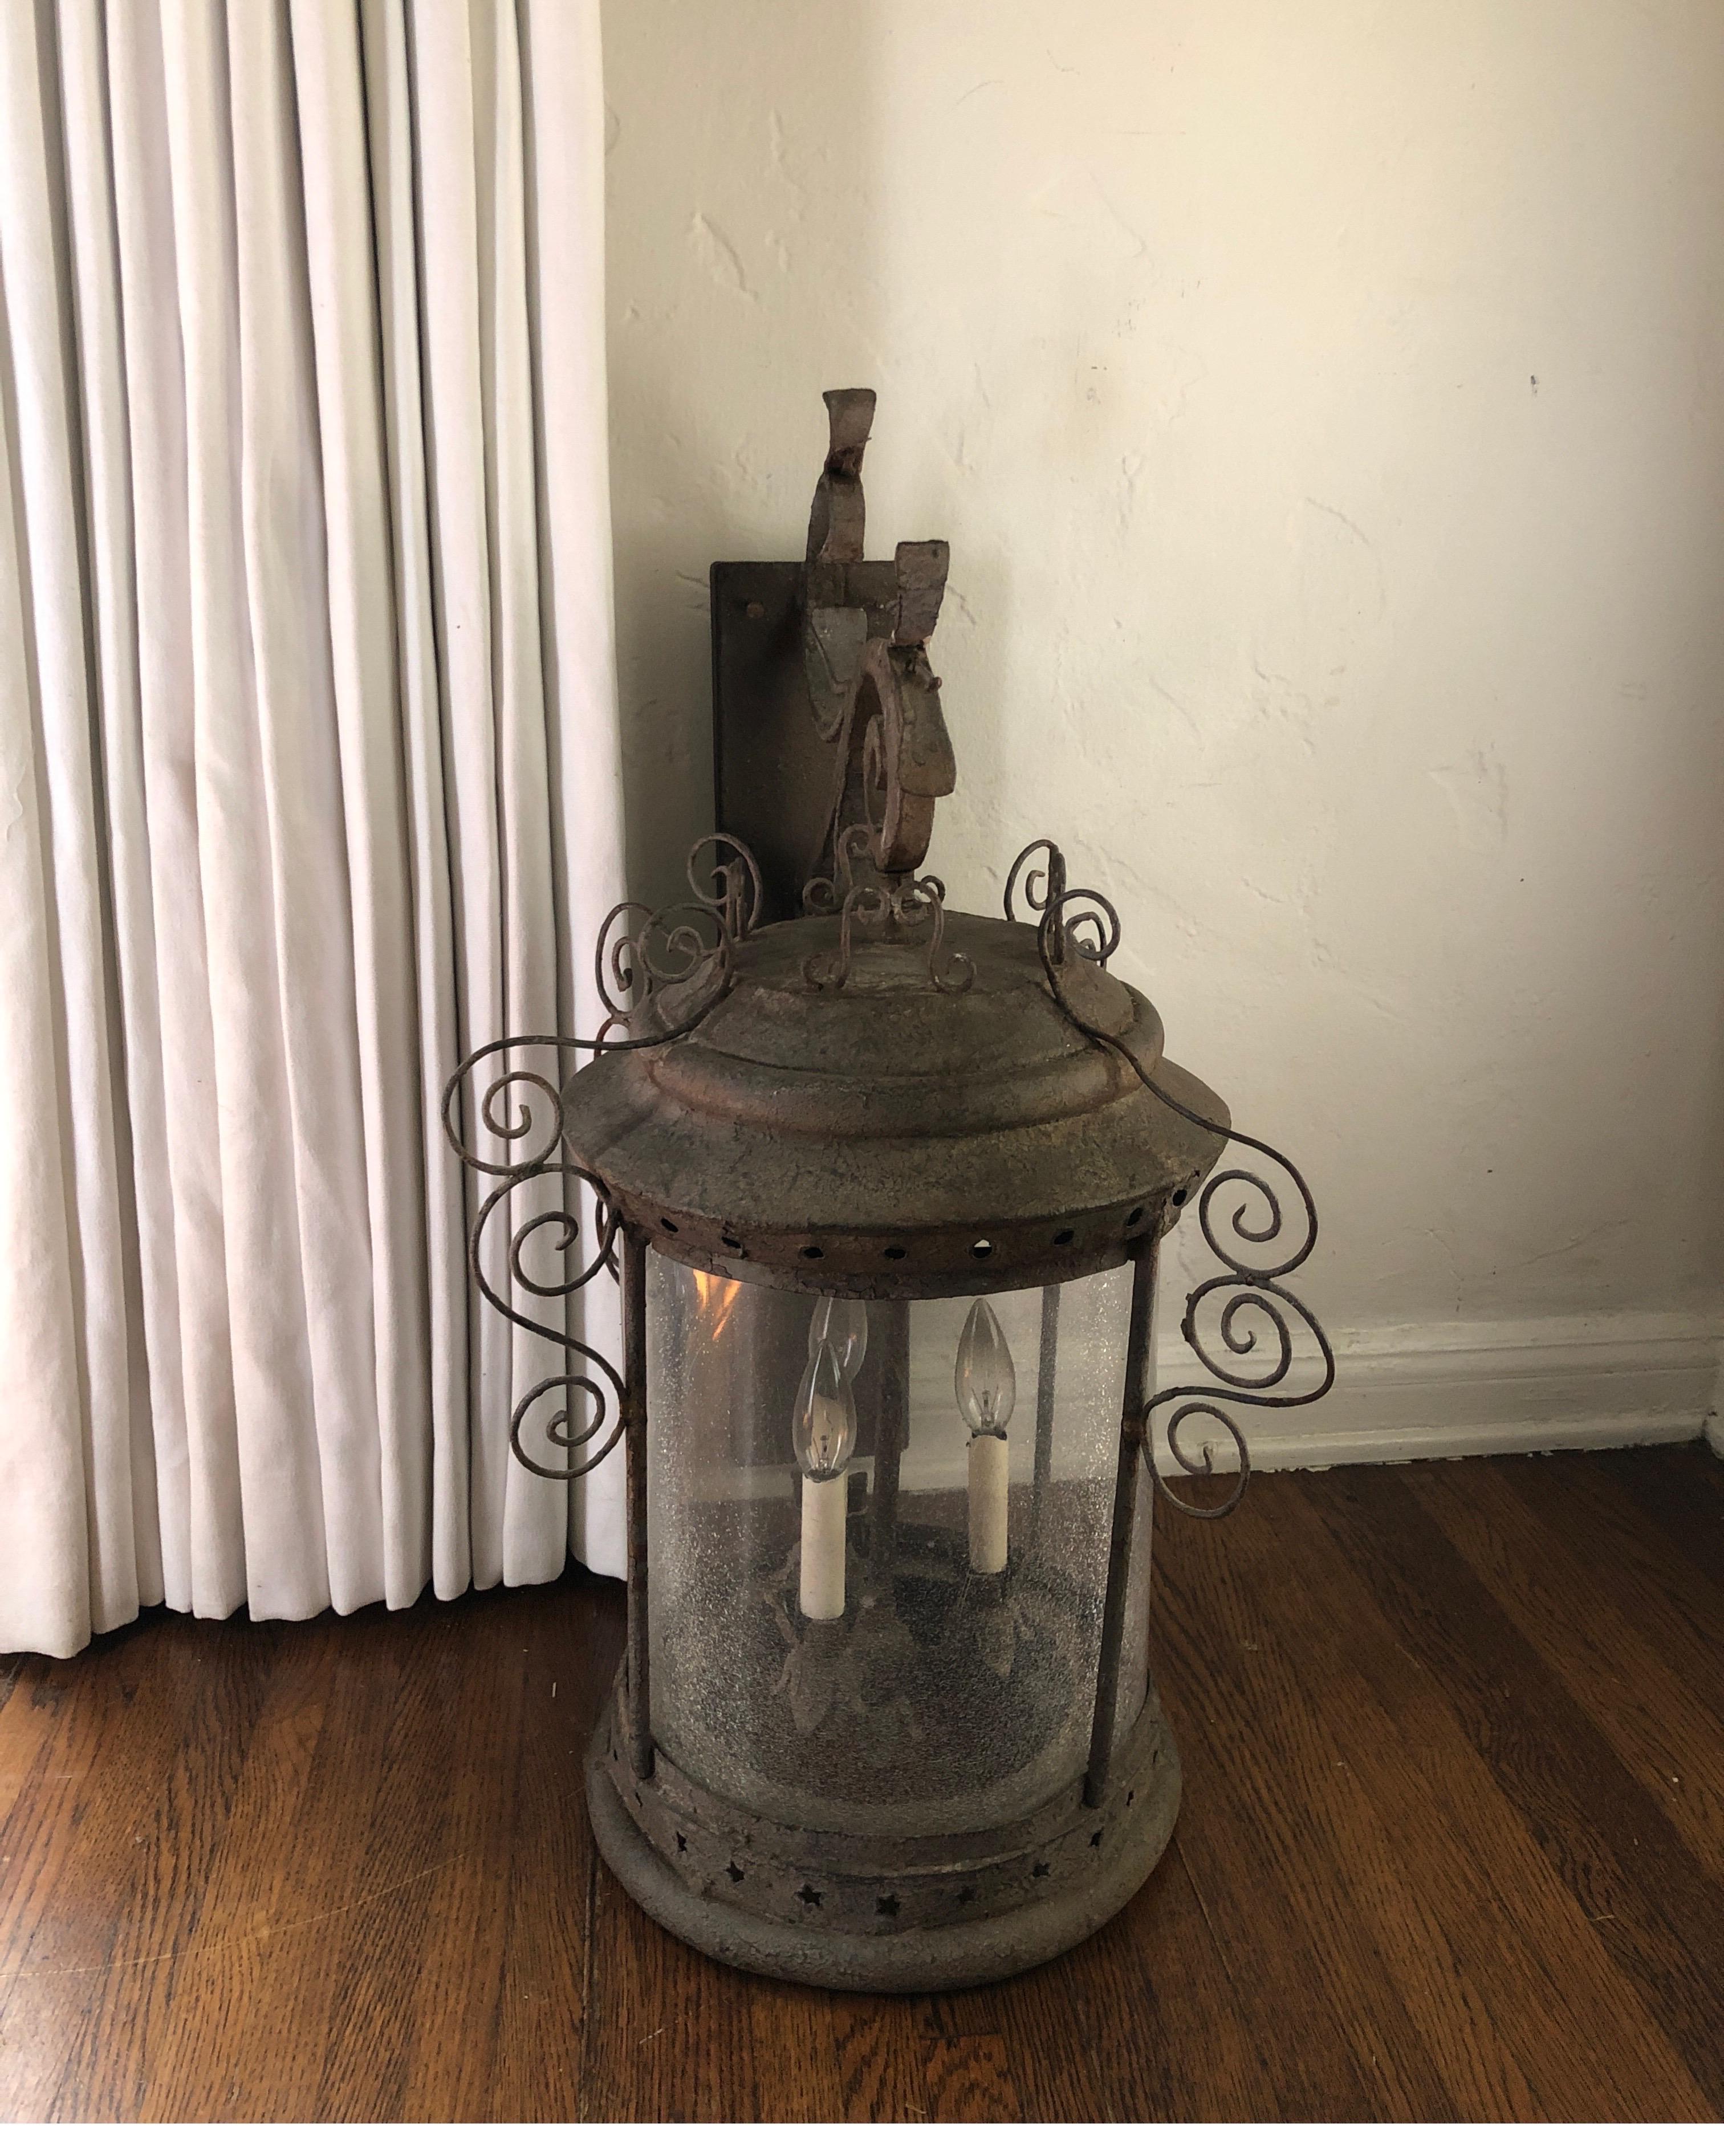 Beautiful distressed lantern approximate 27” height and 30 height including bracket. 19” depth from wall. 18” wide.
Old glass with crackle appearance. Scroll iron work and 3 light candelabra inside.